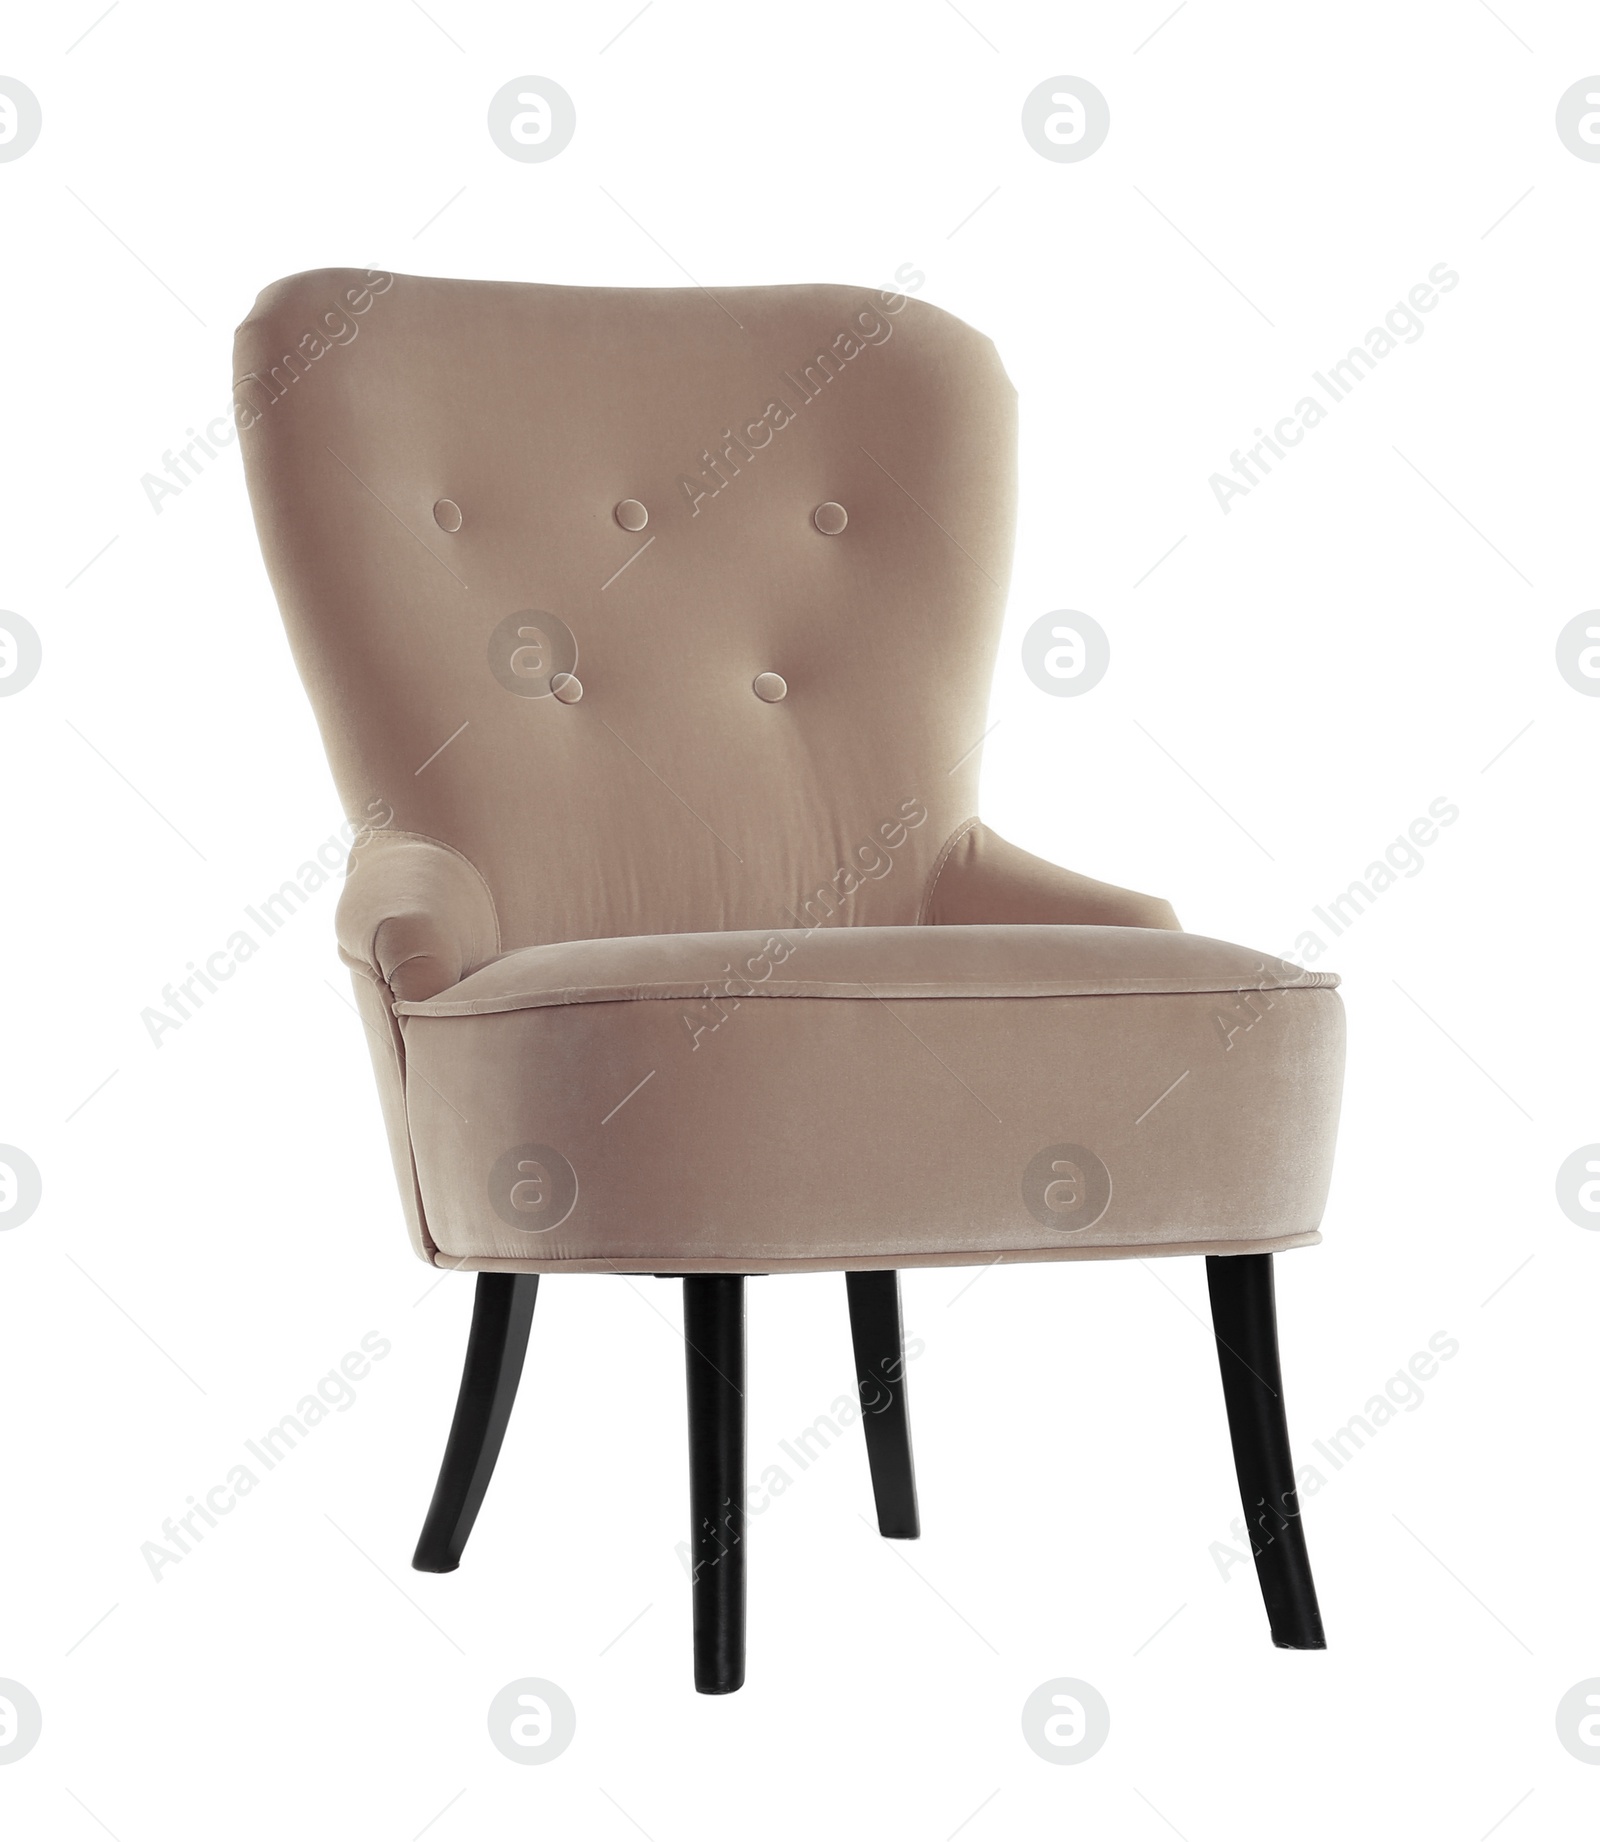 Image of One comfortable light brown armchair isolated on white